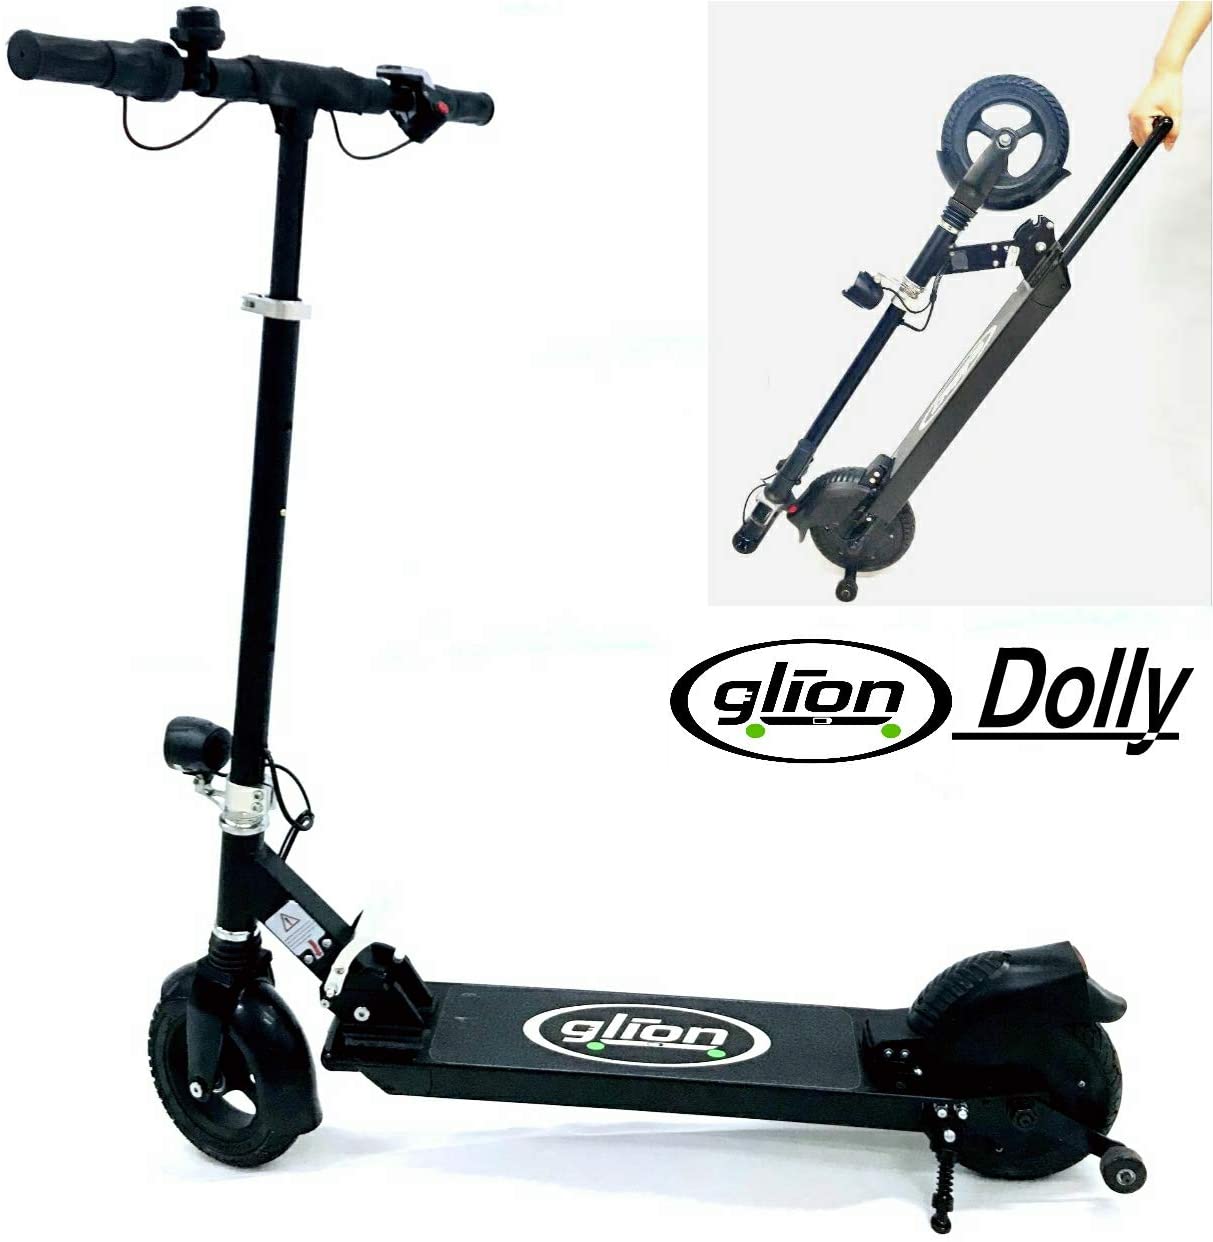 Glion Dolly (250W) Electric Scooter For College Students